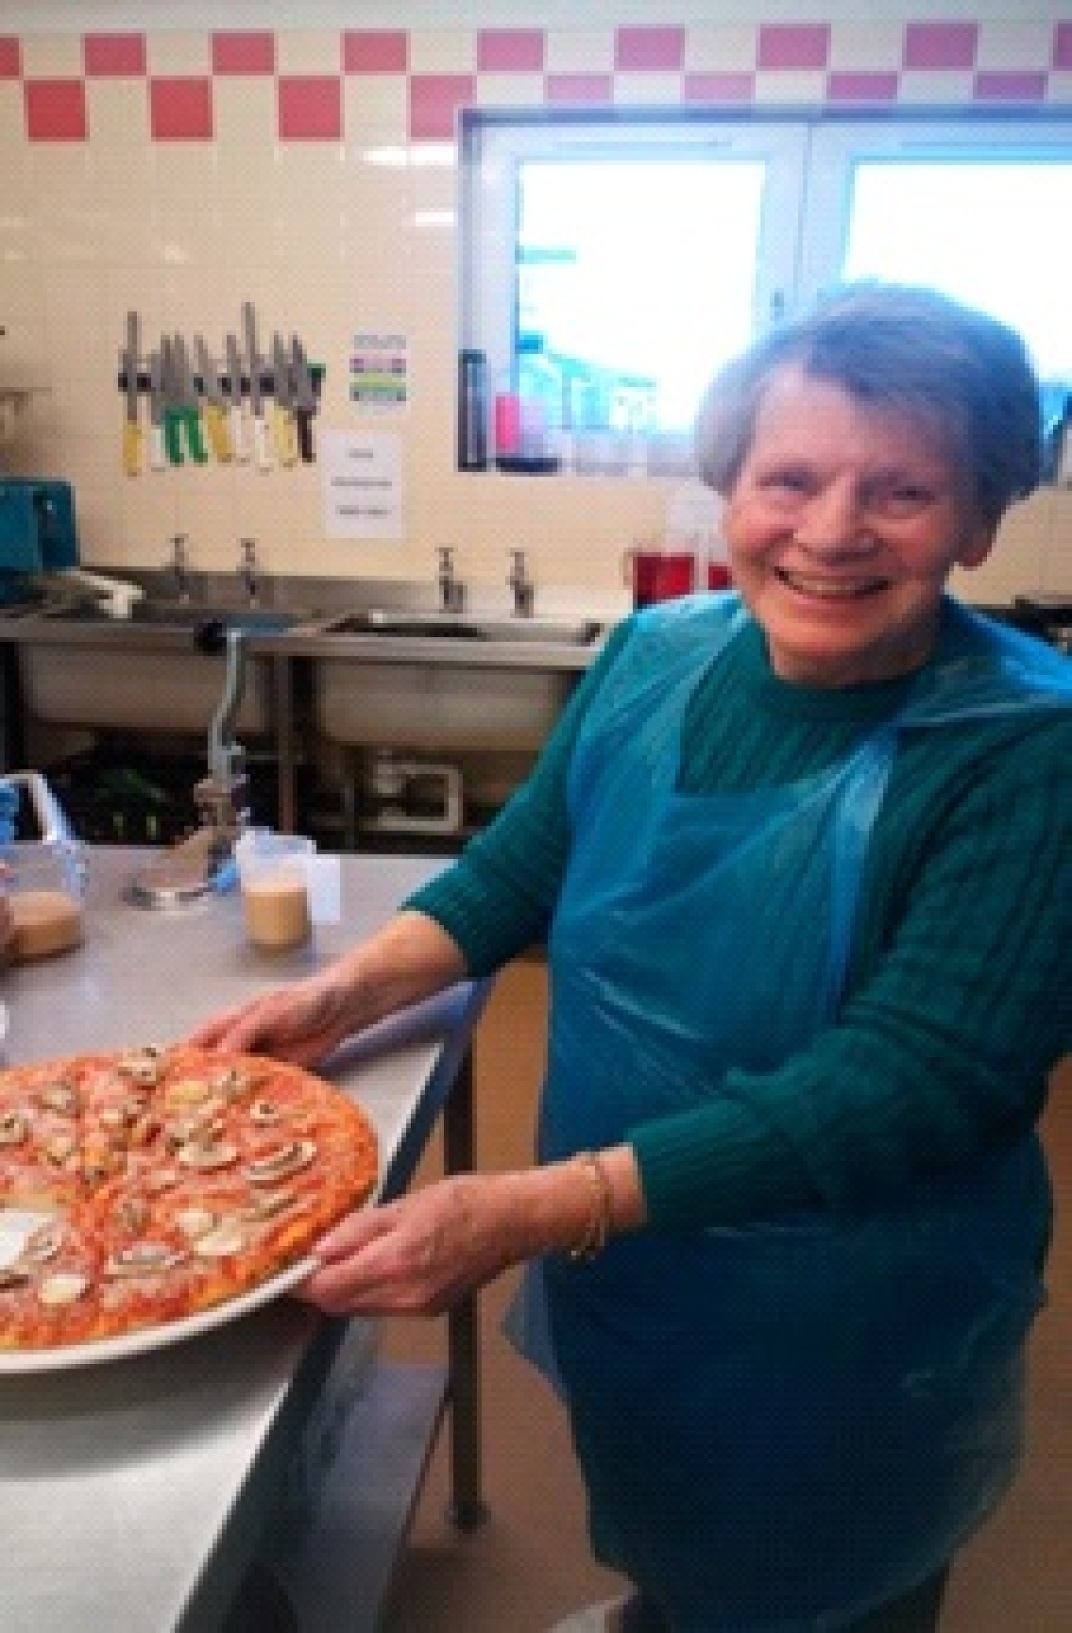 Pizza making at Almond Court